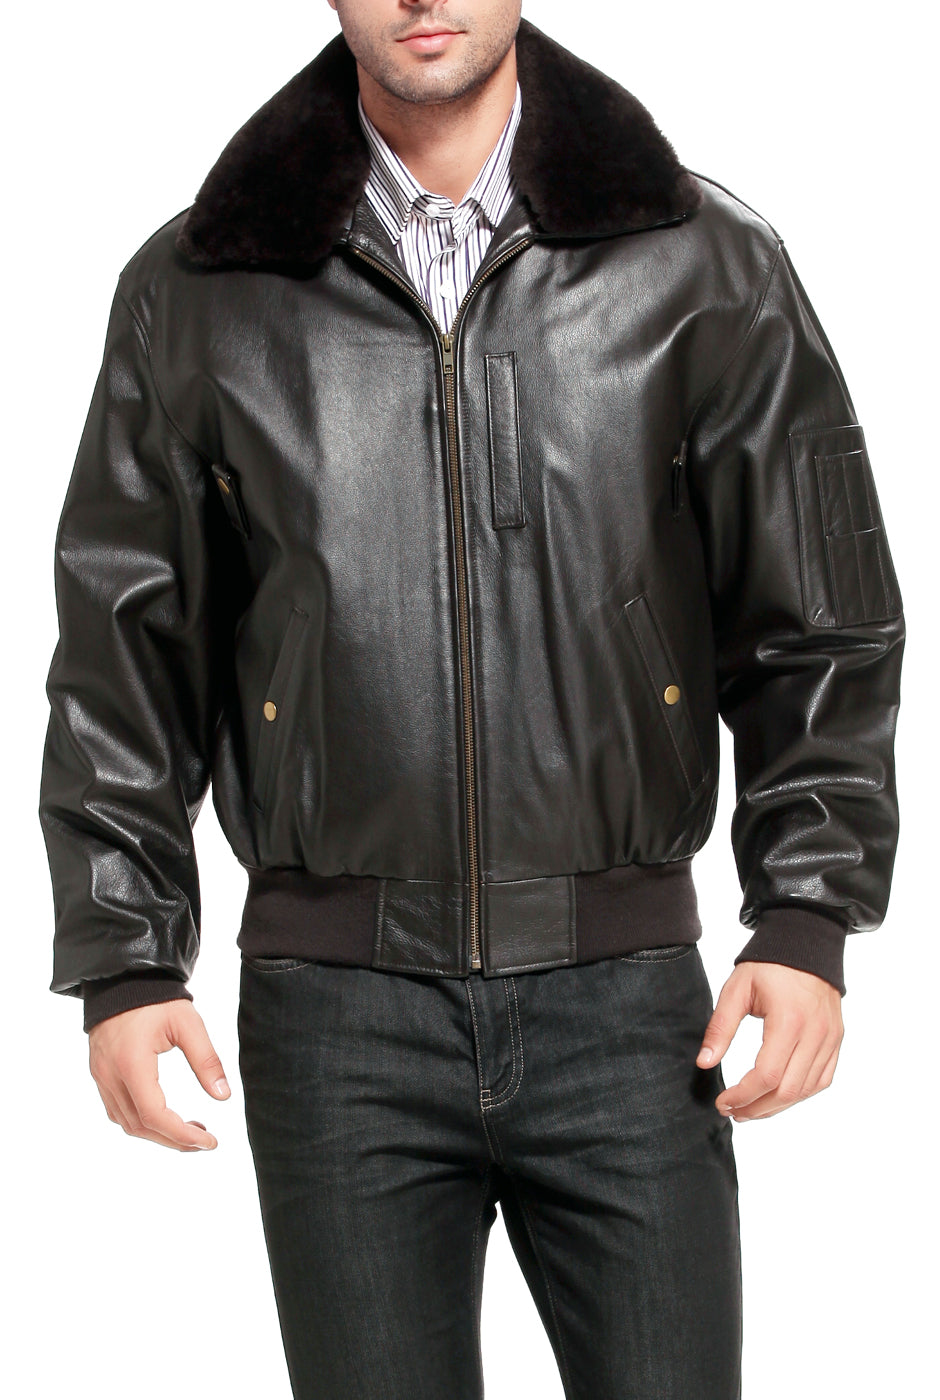 Men's Leather Bomber Jackets & Air Force Jackets